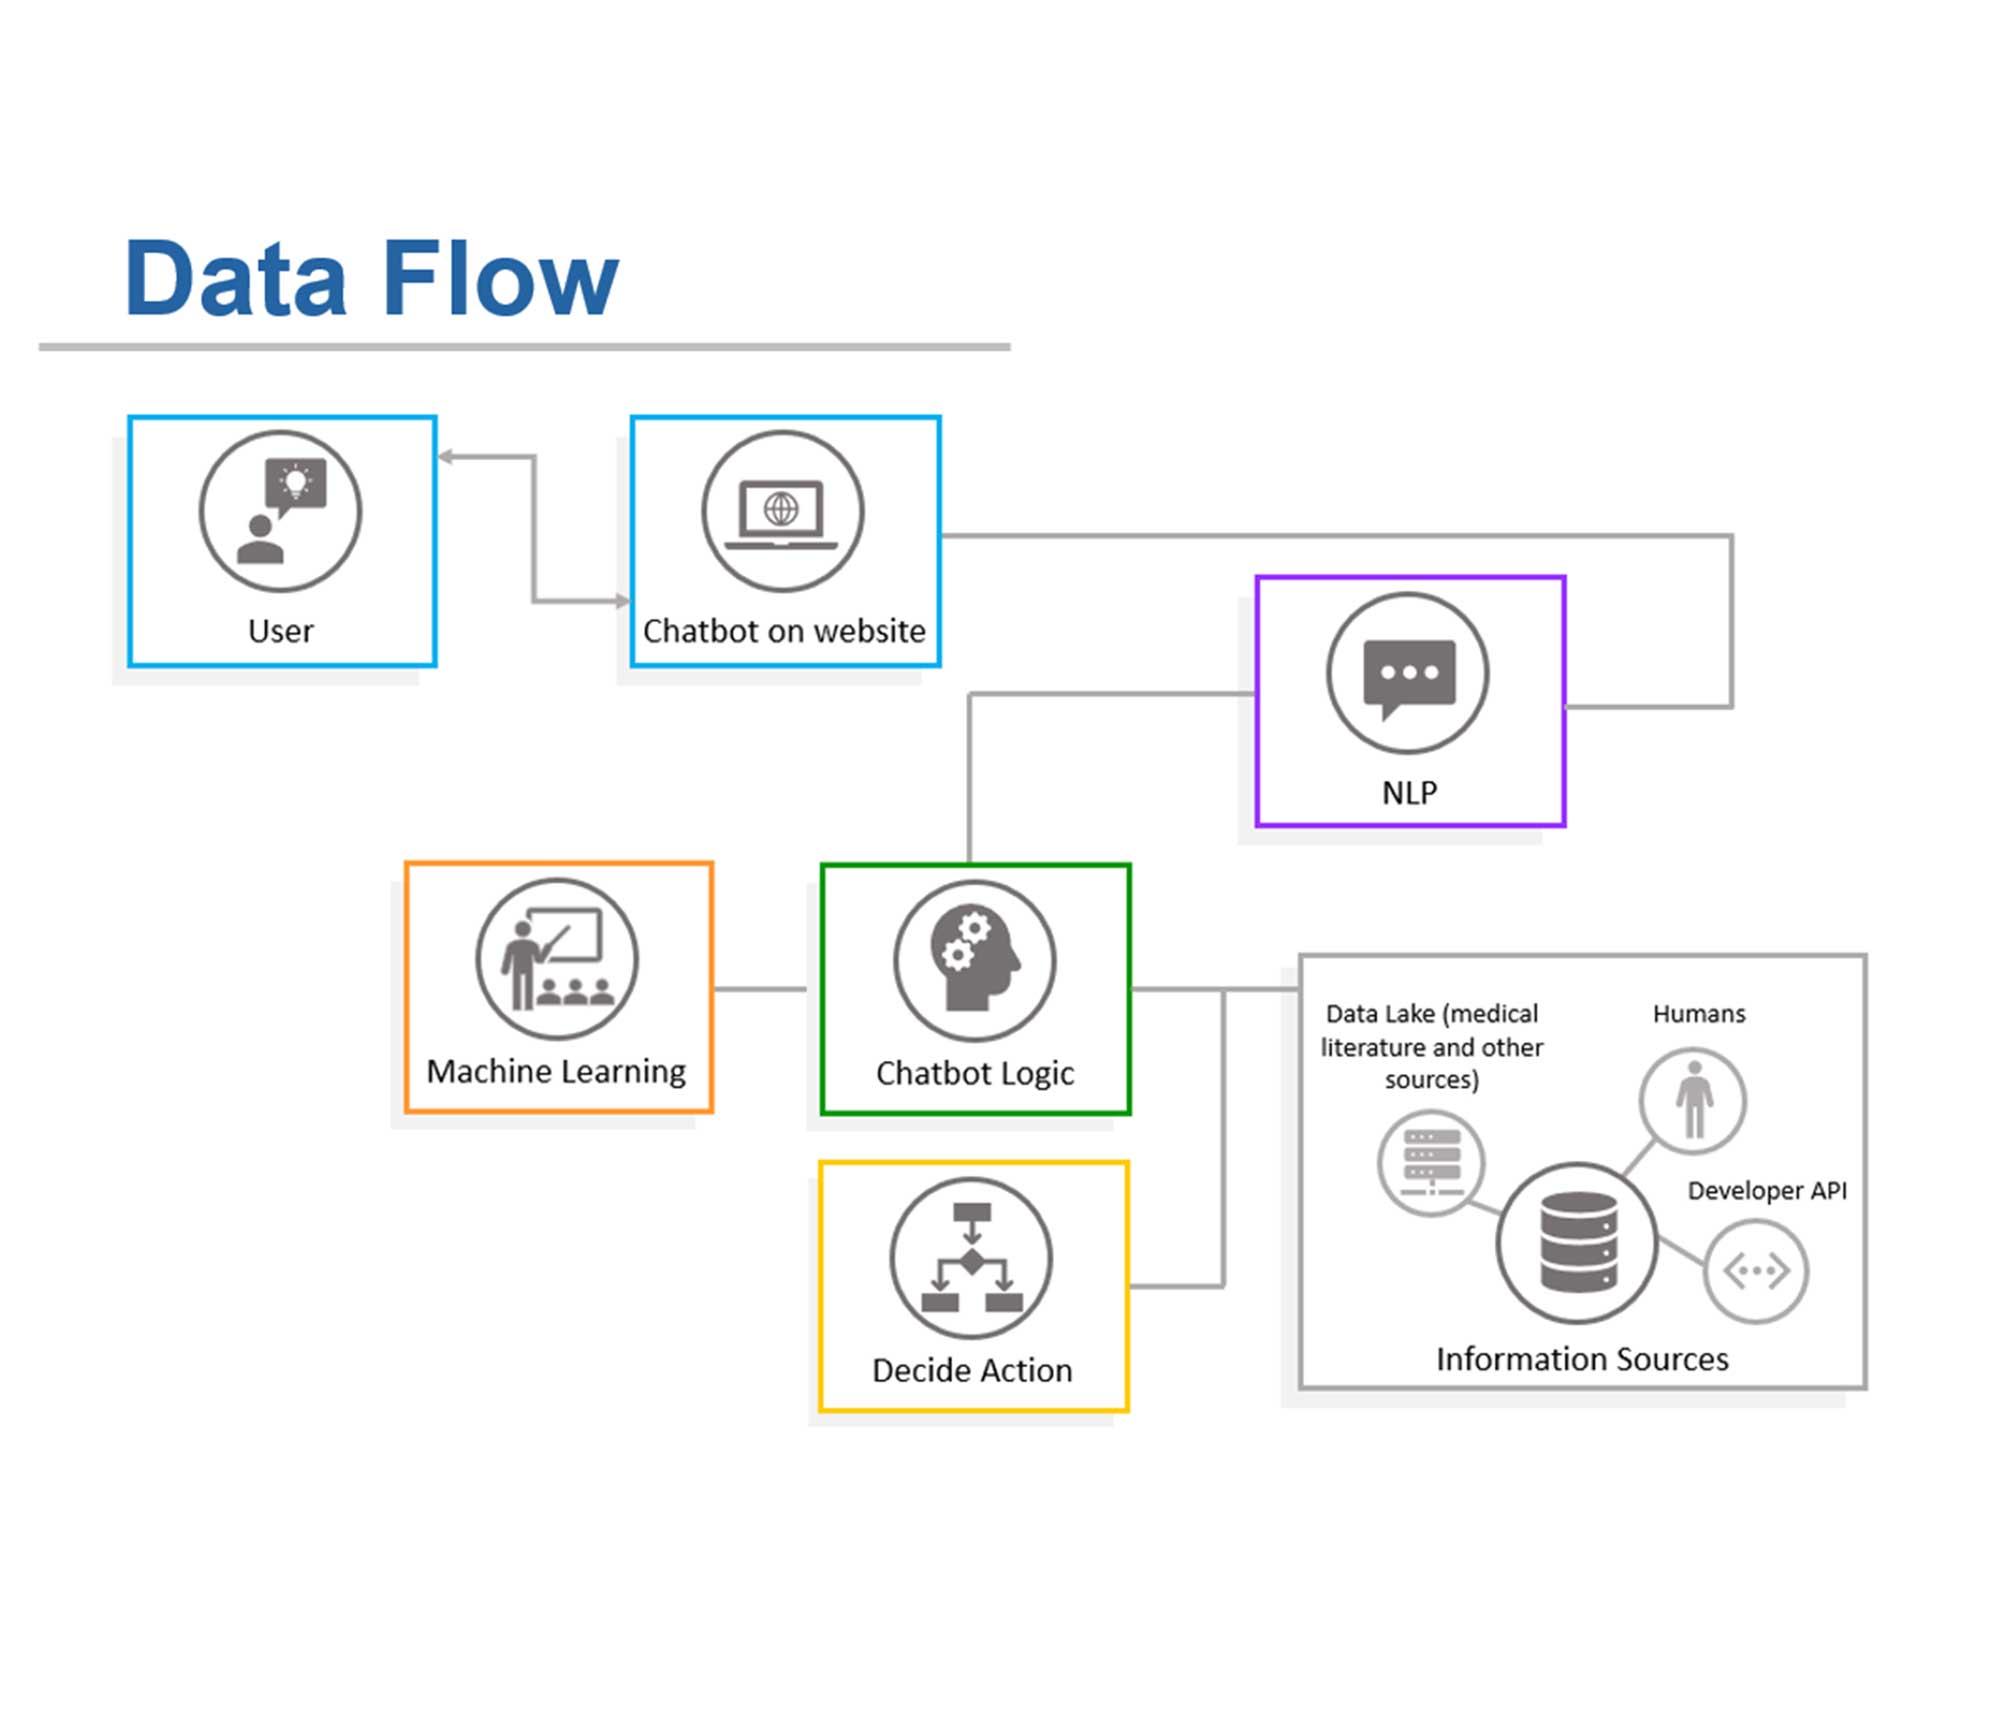 Data flow diagram for a chatbot using natural language processing